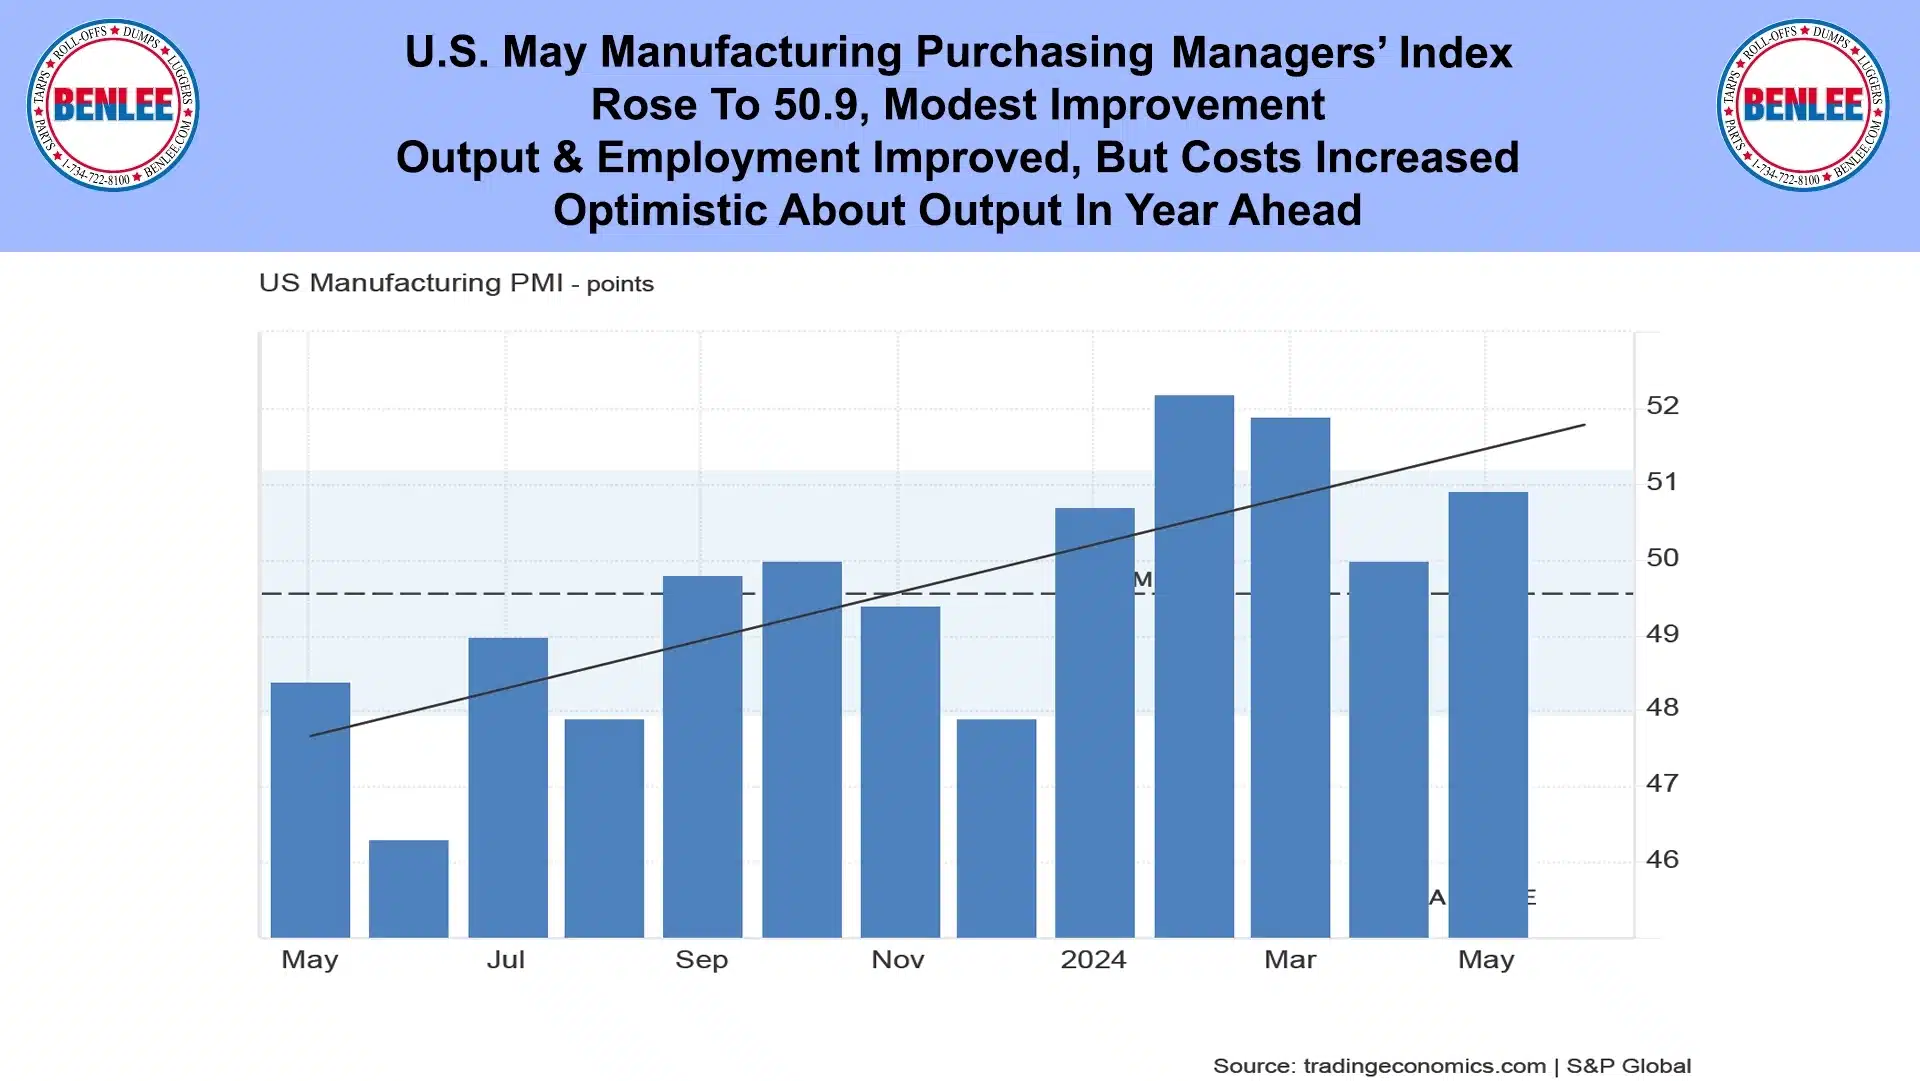 U.S. May Manufacturing Purchasing Managers Index